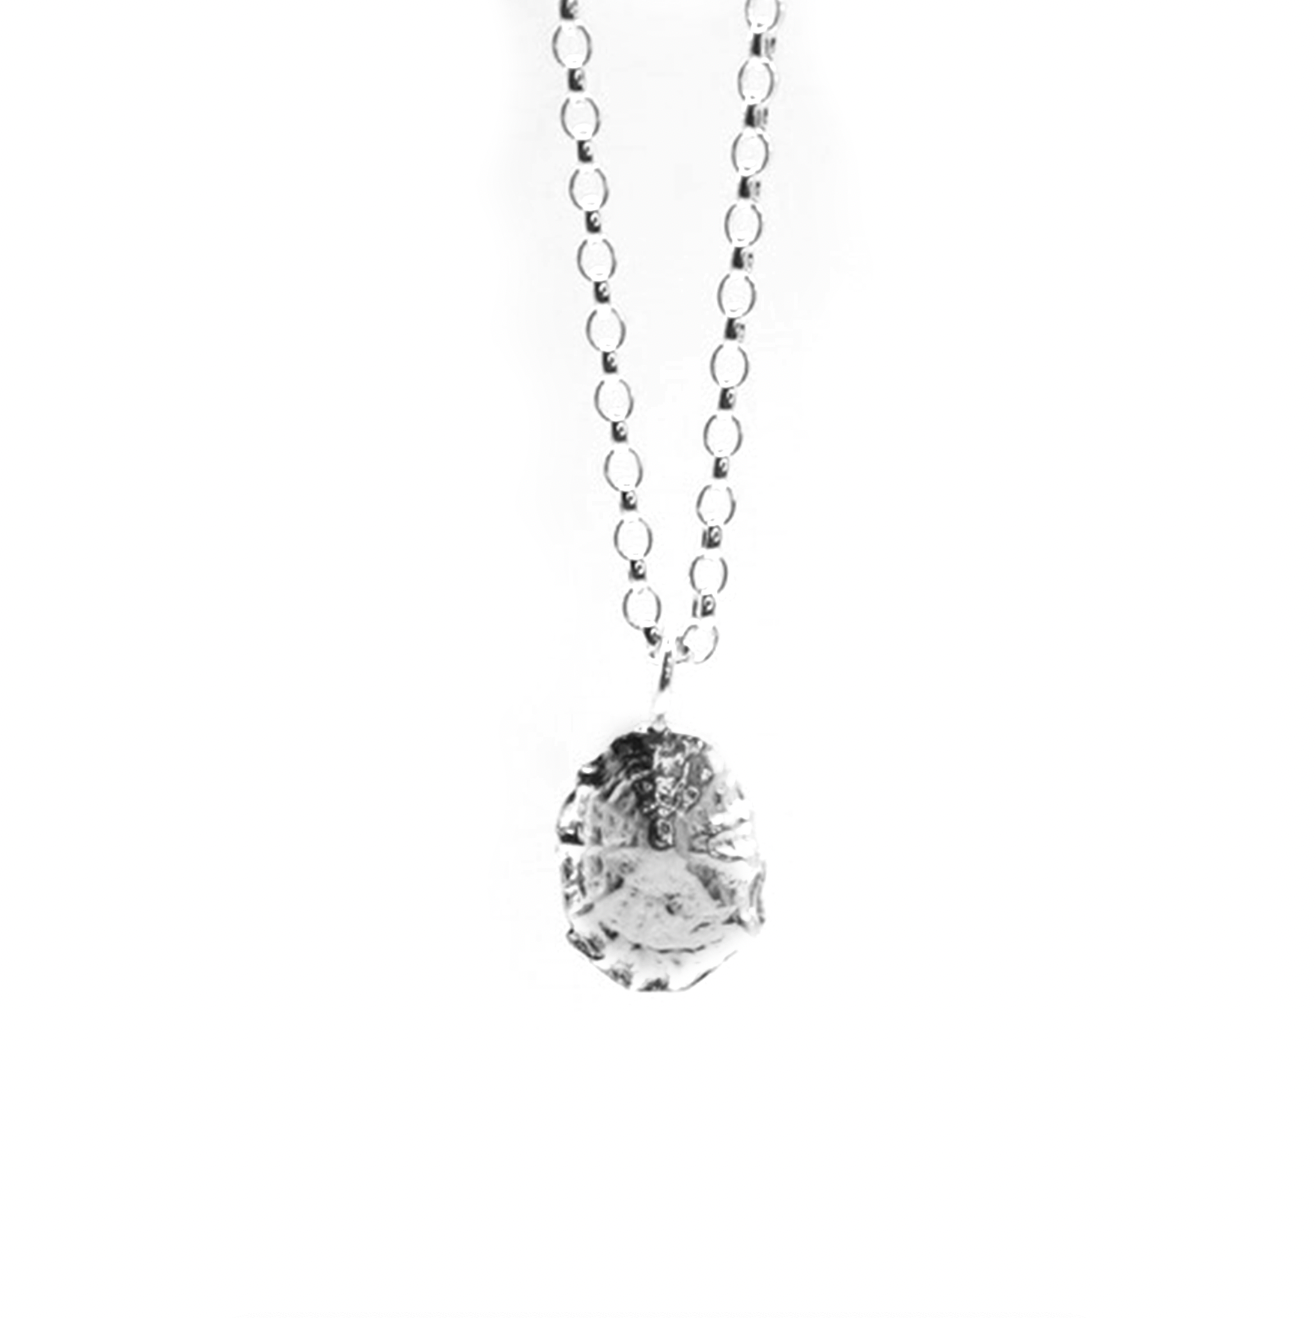 Budle Bay Limpet Necklace